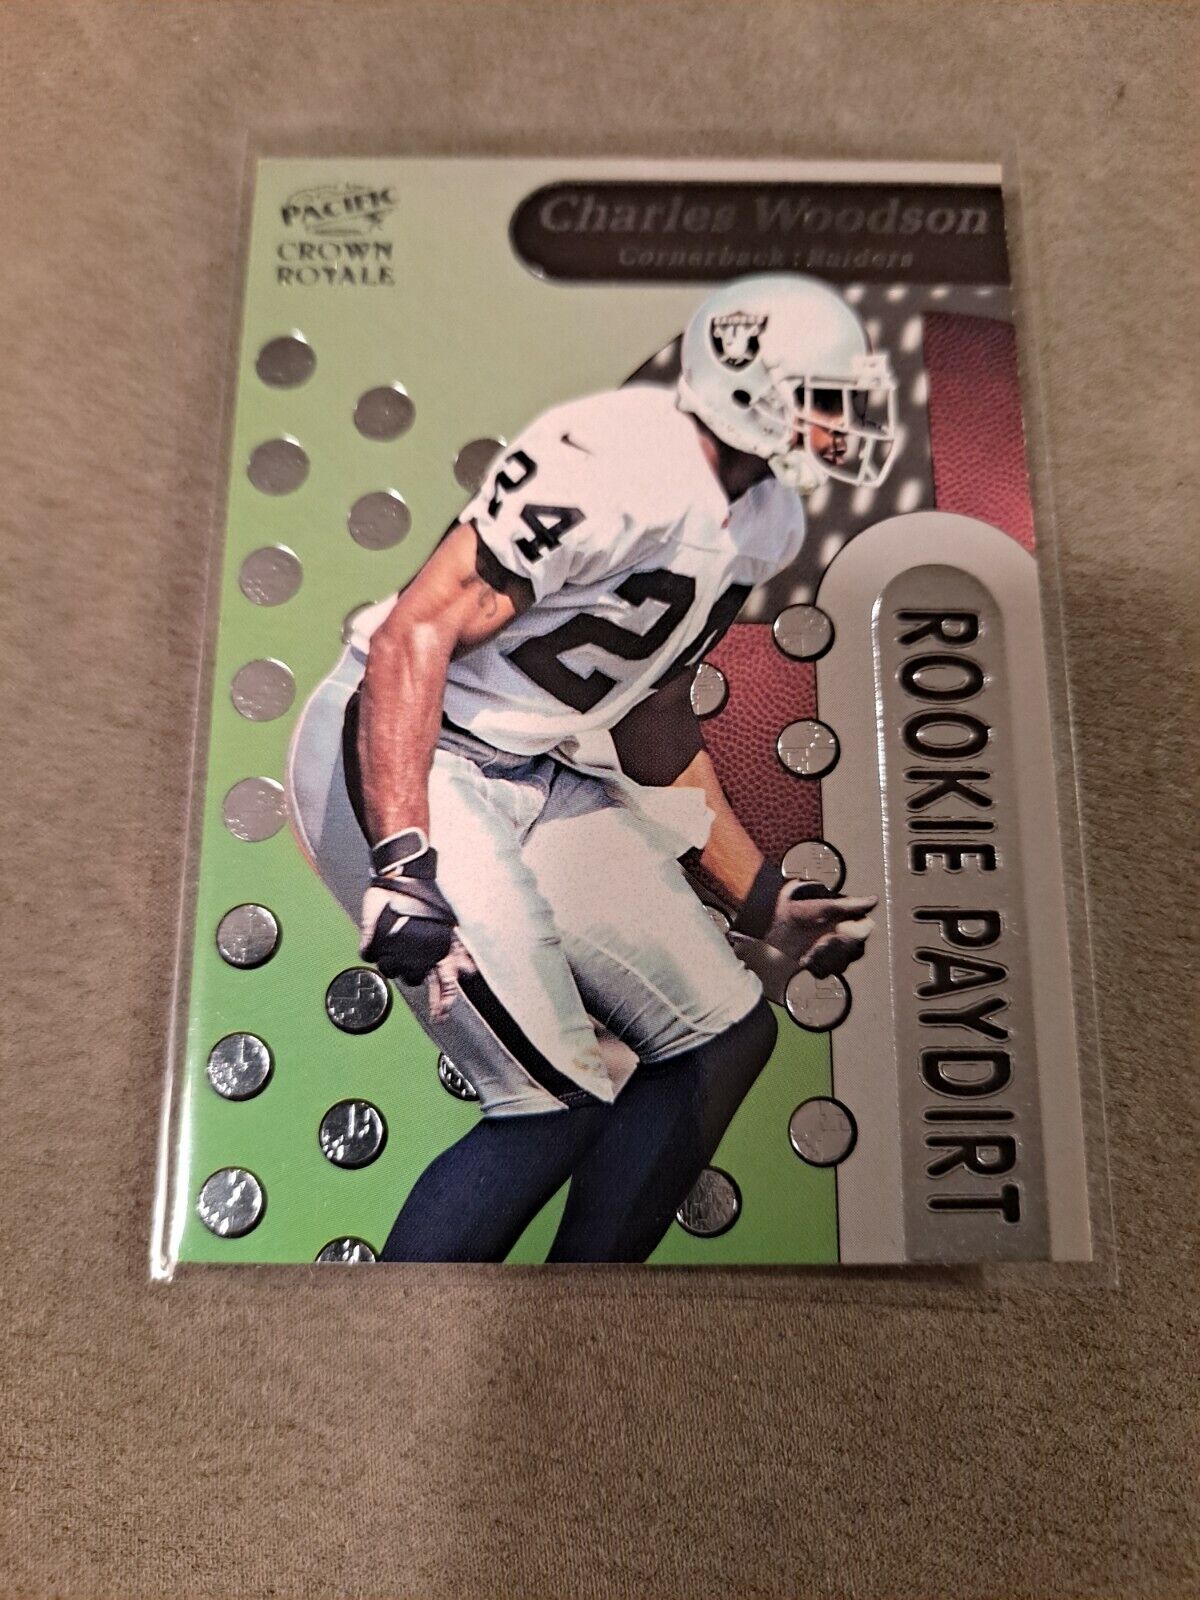 1998 CHARLES WOODSON PACIFIC CROWN ROYALE PAY DIRT ROOKIE INSERT #14 RAIDERS RC